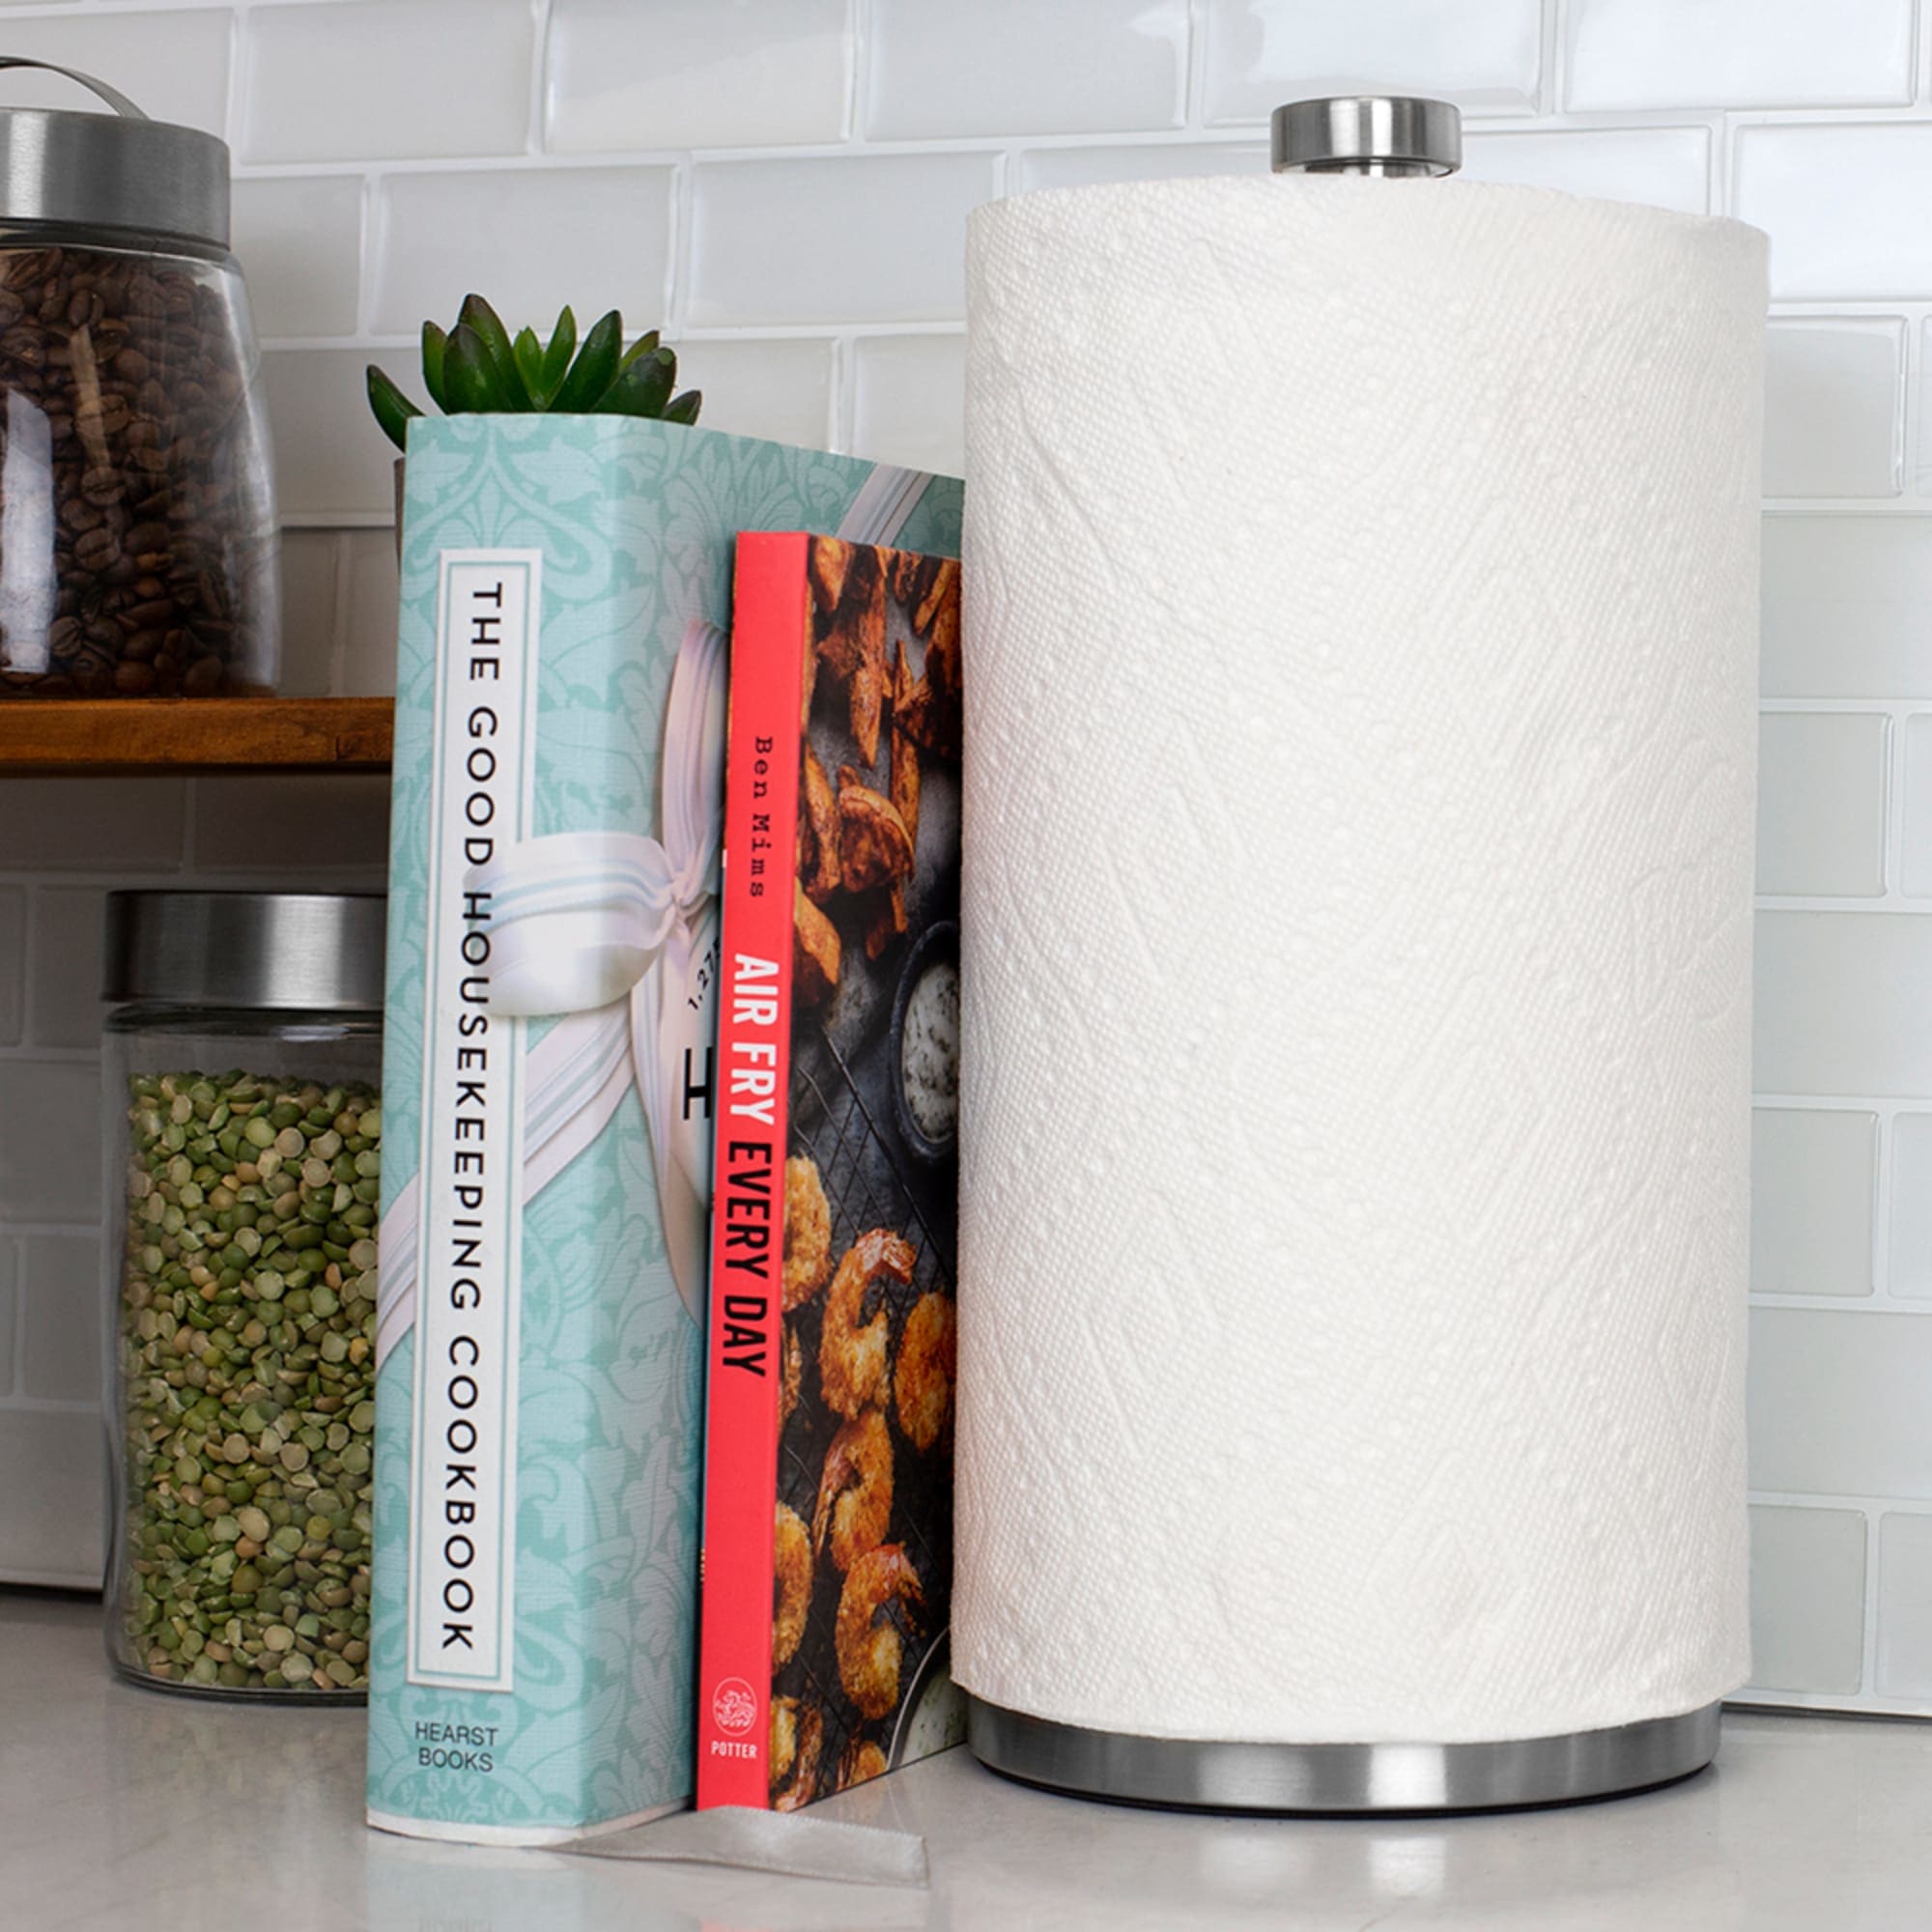 Home Basics Free Standing Paper Towel Holder with Weighted Base, Silver $6.50 EACH, CASE PACK OF 6